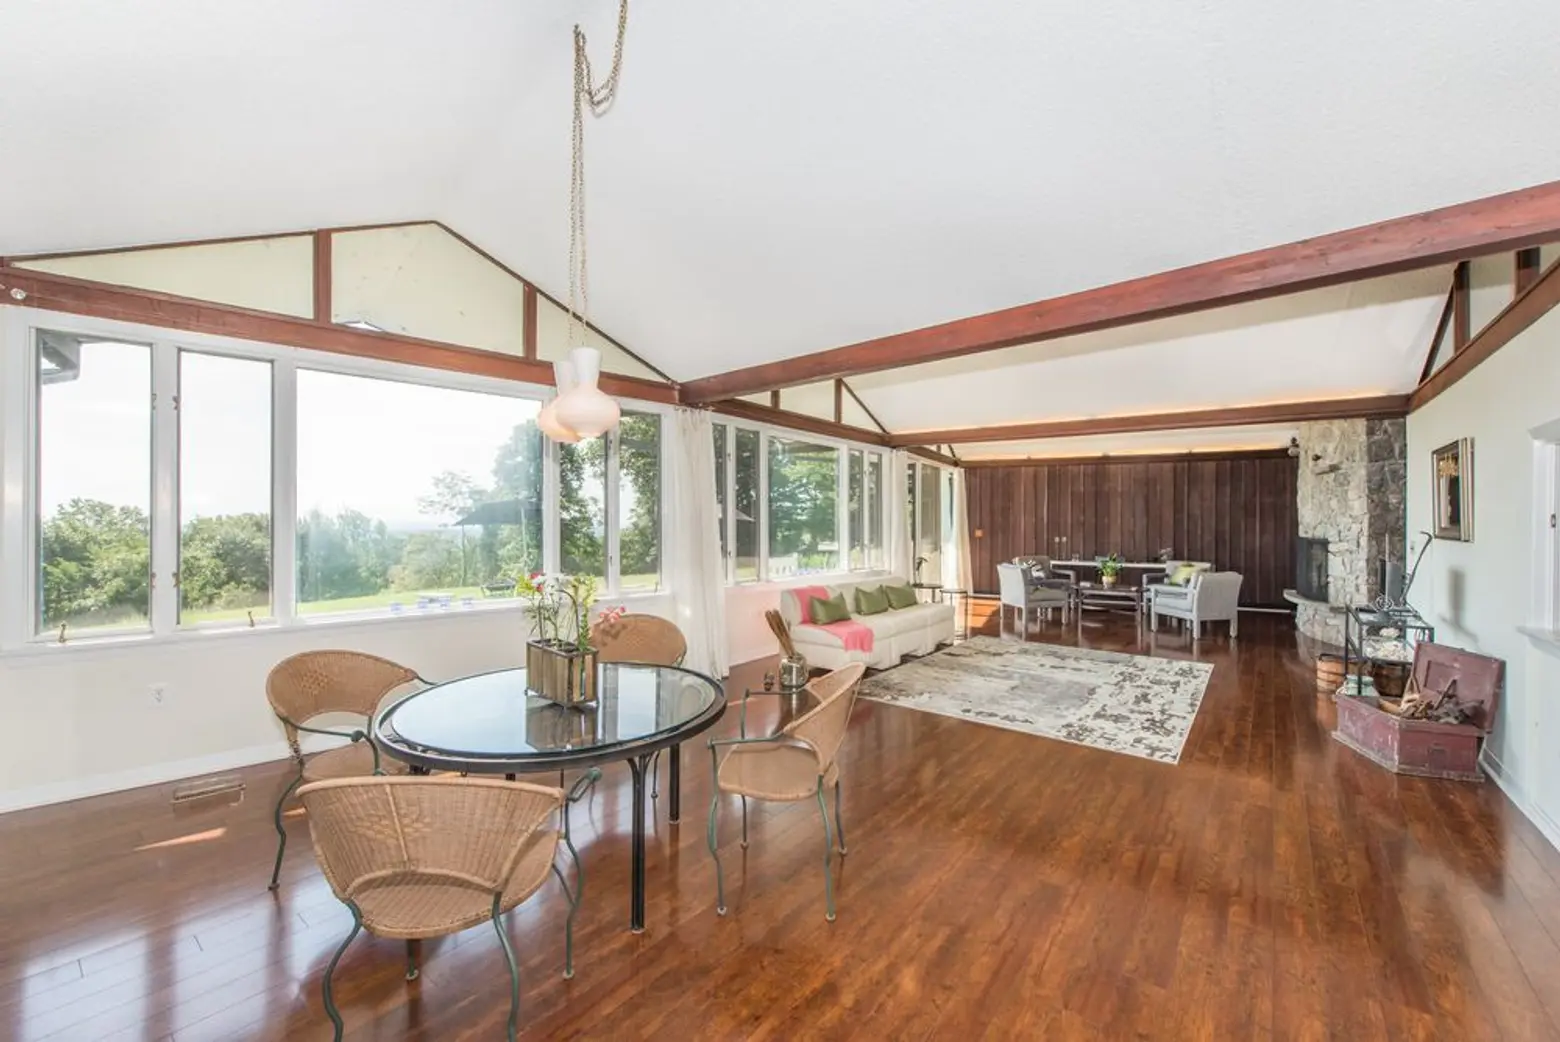 24 Eagle Ridge Way, First Watchung Mountain, mid-century modern, modern house, modern home, New Jersey, West Orange, cool listings, eichler, 60s, mod, mid-century design, modernist architecture